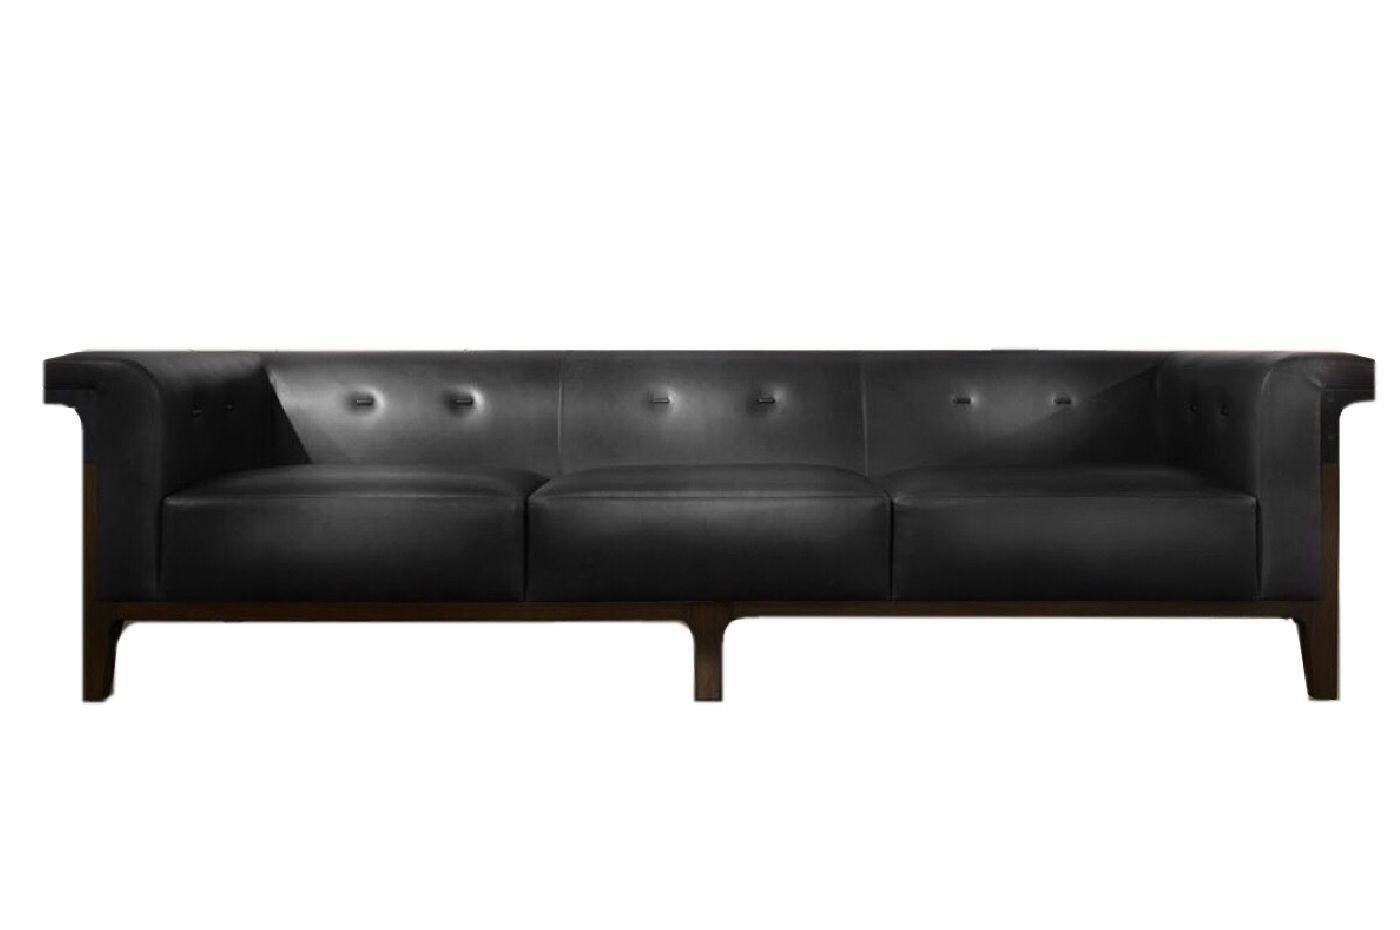 European Hadrian Leather Sofa by Jean-Michel Wilmotte for Holly Hunt, 2010, French Gray